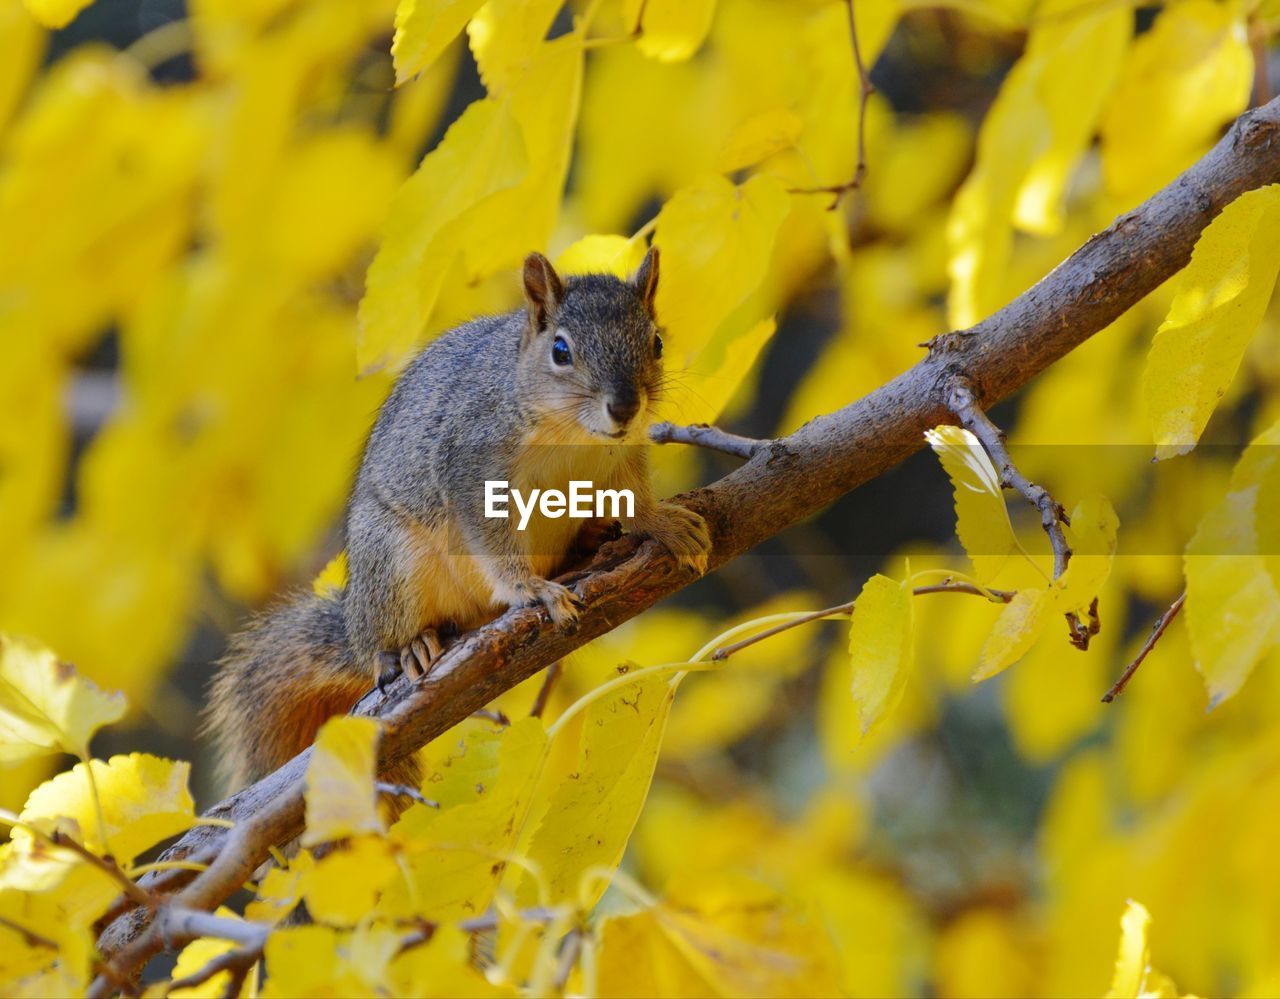 animal, animal themes, animal wildlife, squirrel, yellow, branch, one animal, mammal, wildlife, tree, nature, plant, rodent, no people, cute, chipmunk, outdoors, autumn, plant part, land, leaf, forest, eating, flower